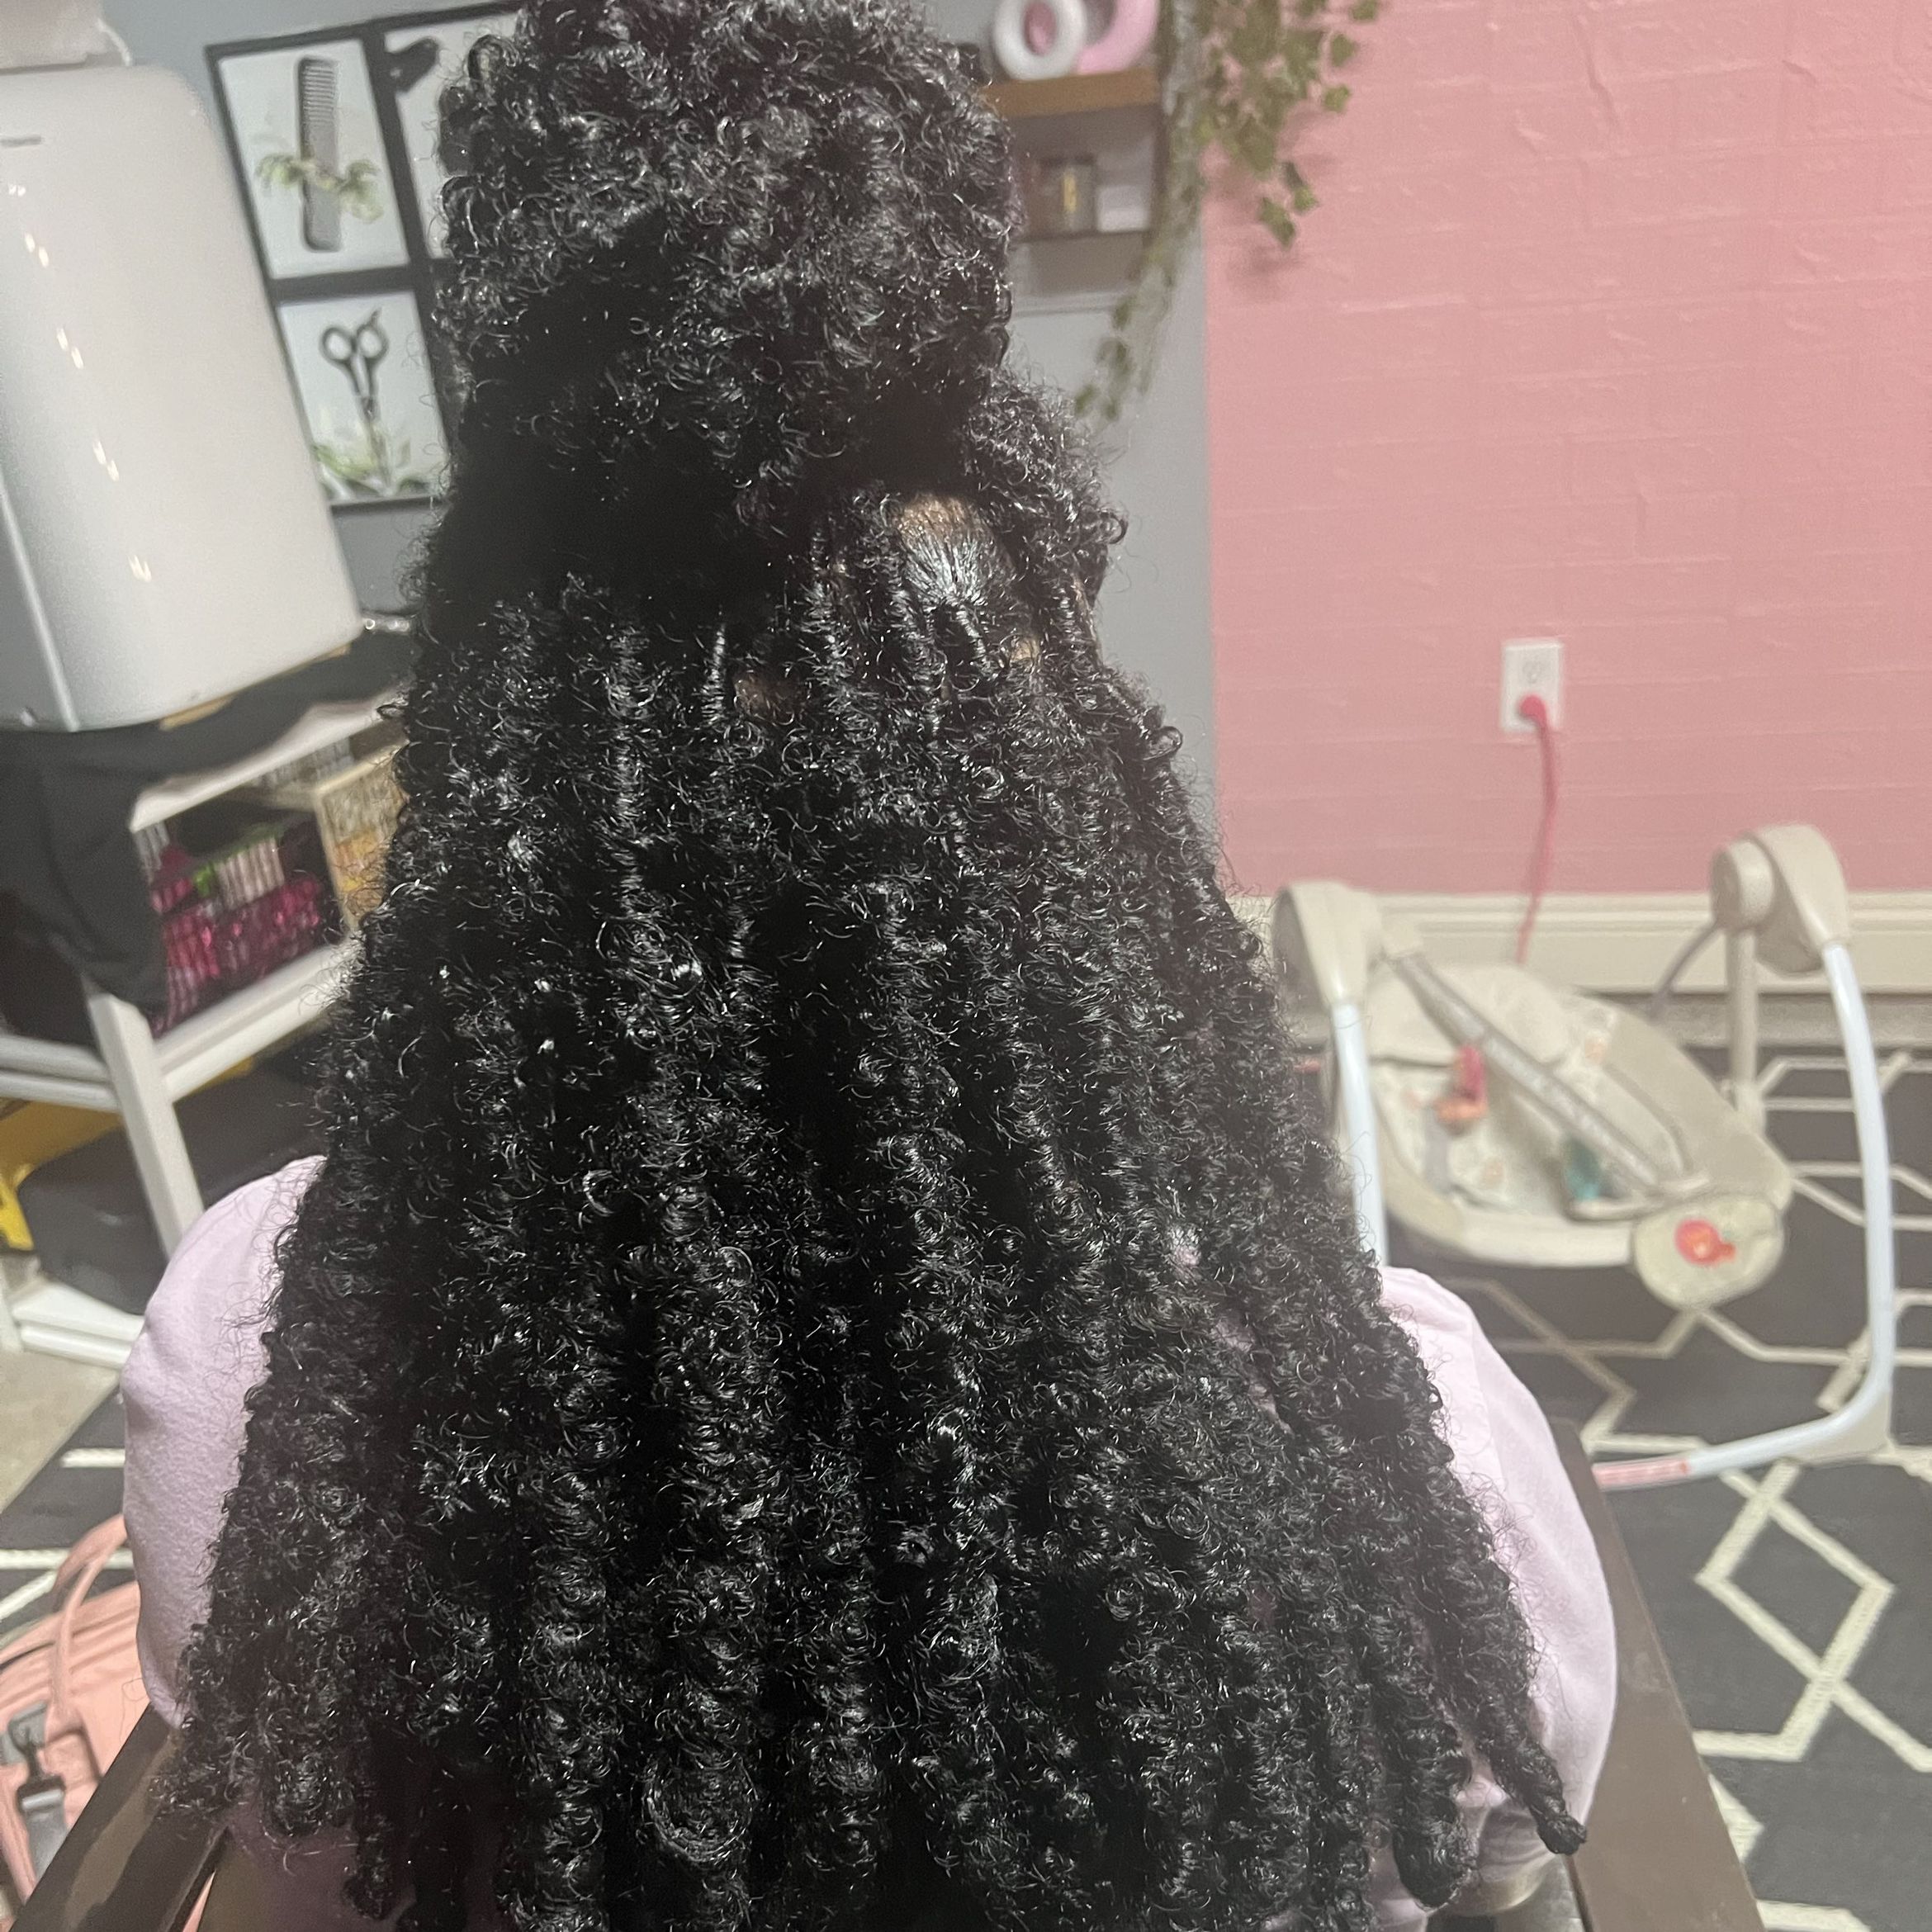 Shoulder-Length Butterfly Locs 🦋 (hair included) portfolio